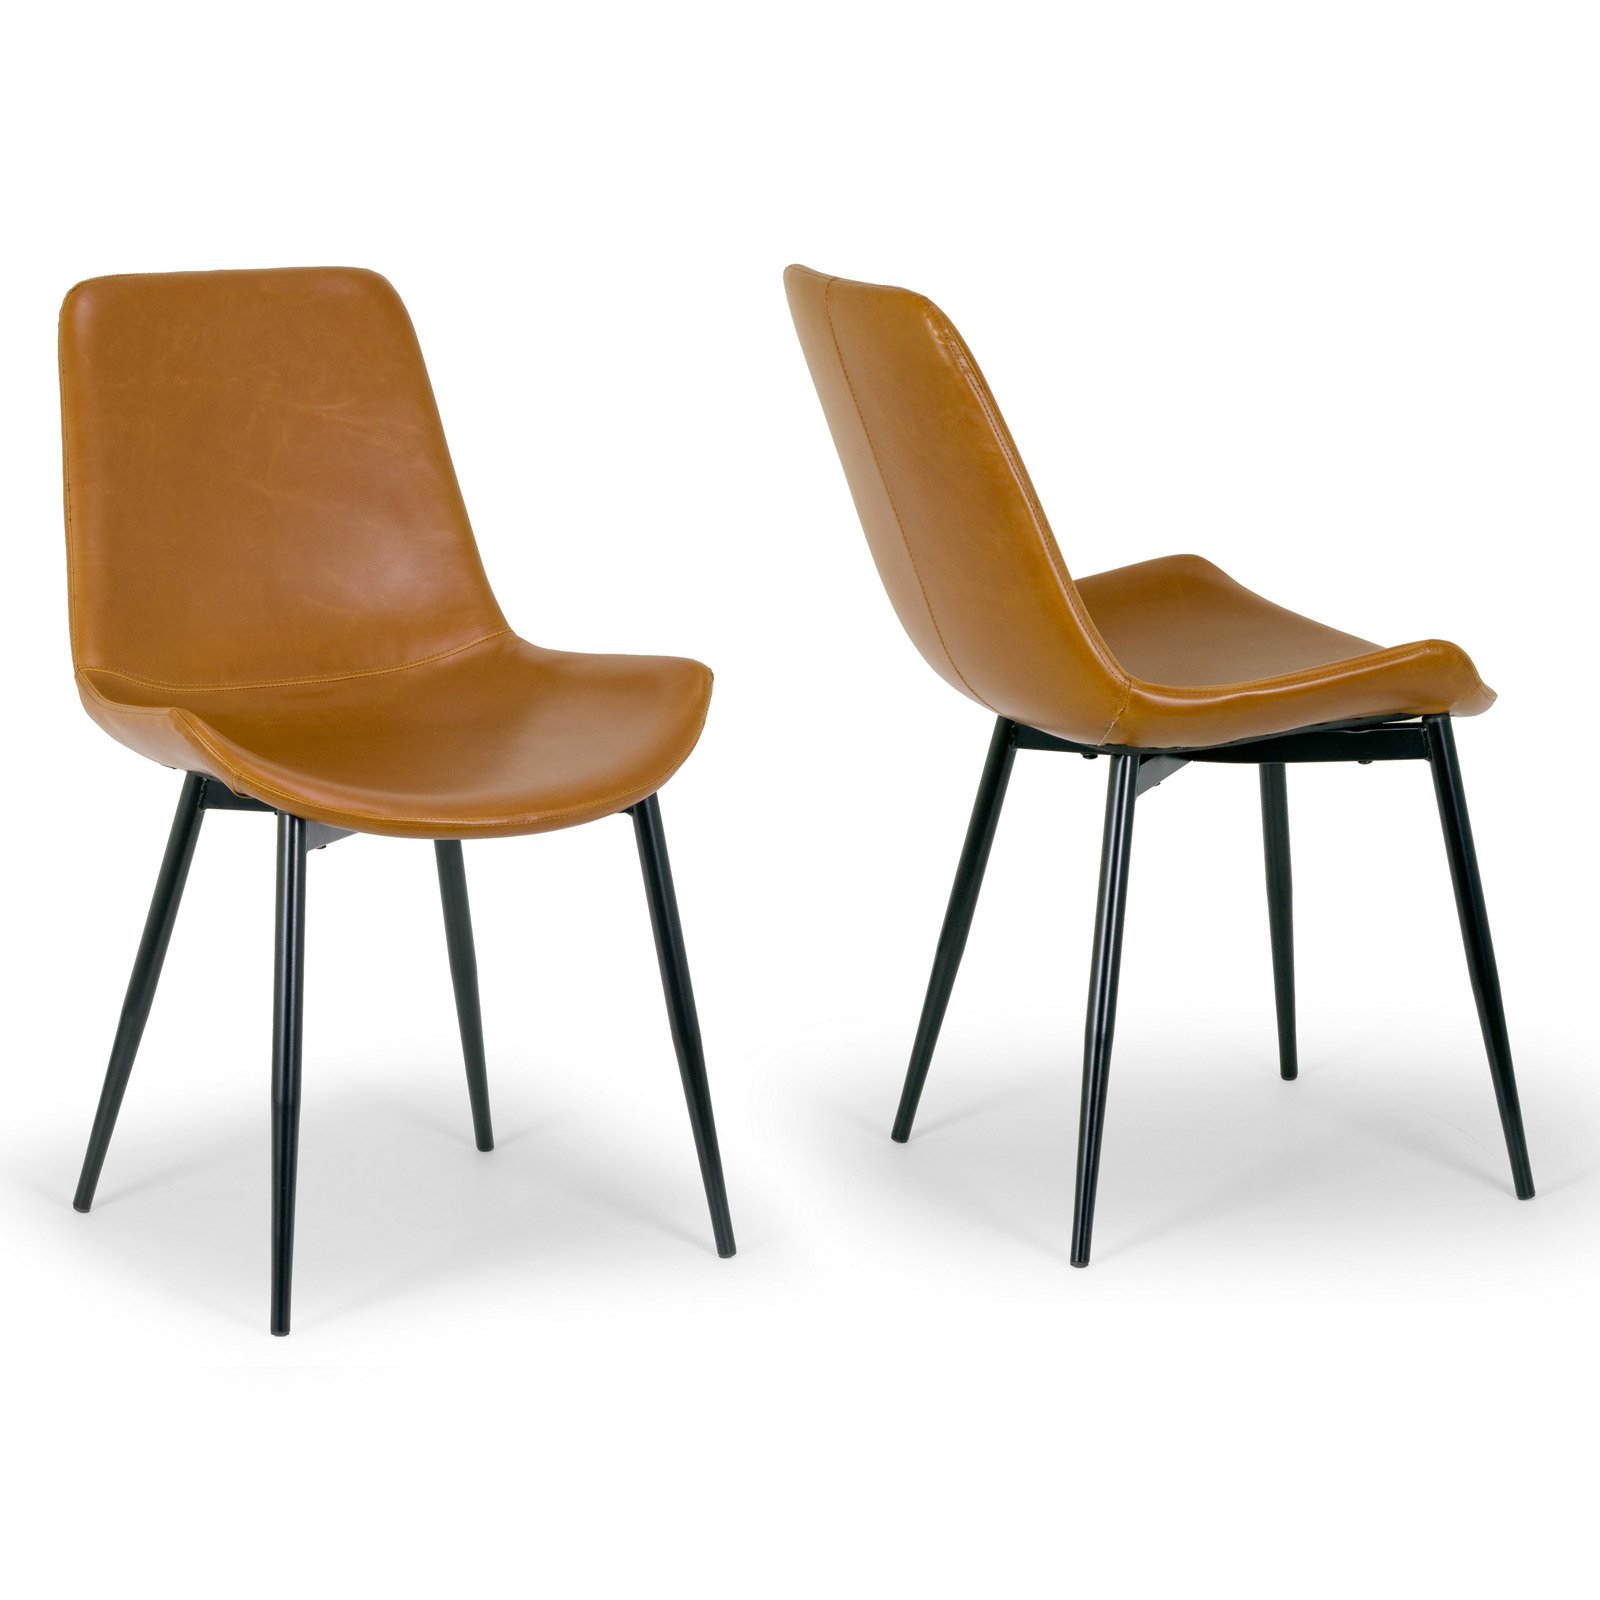 Set of 2 Alary Caramel Brown Faux Leather Modern Dining Chair with Black Iron Legs - image 1 of 6